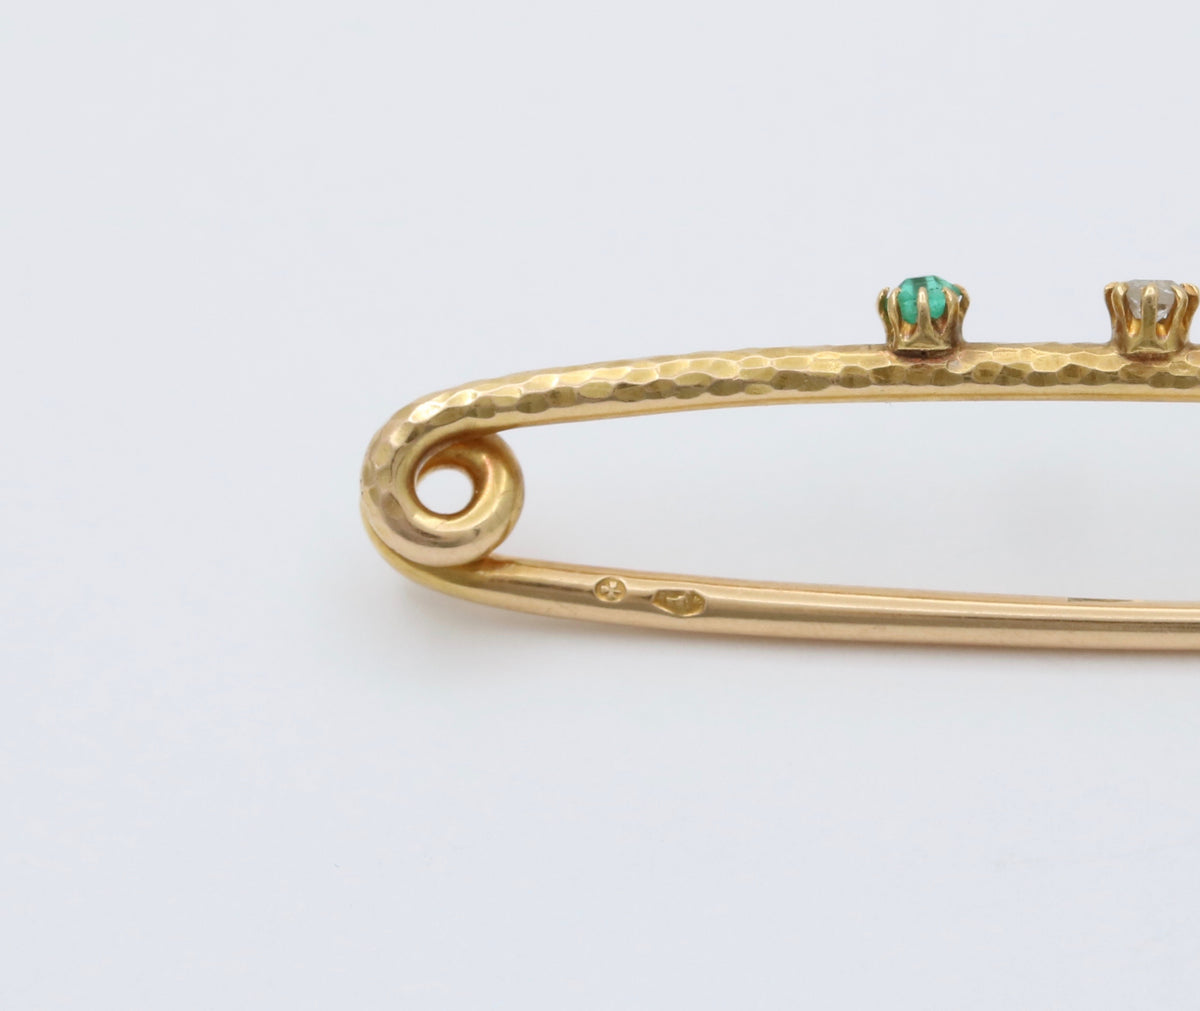 Vintage 18K Gold, Diamond and Emerald Safety Pin, Chain Extender, Charm Enhancer